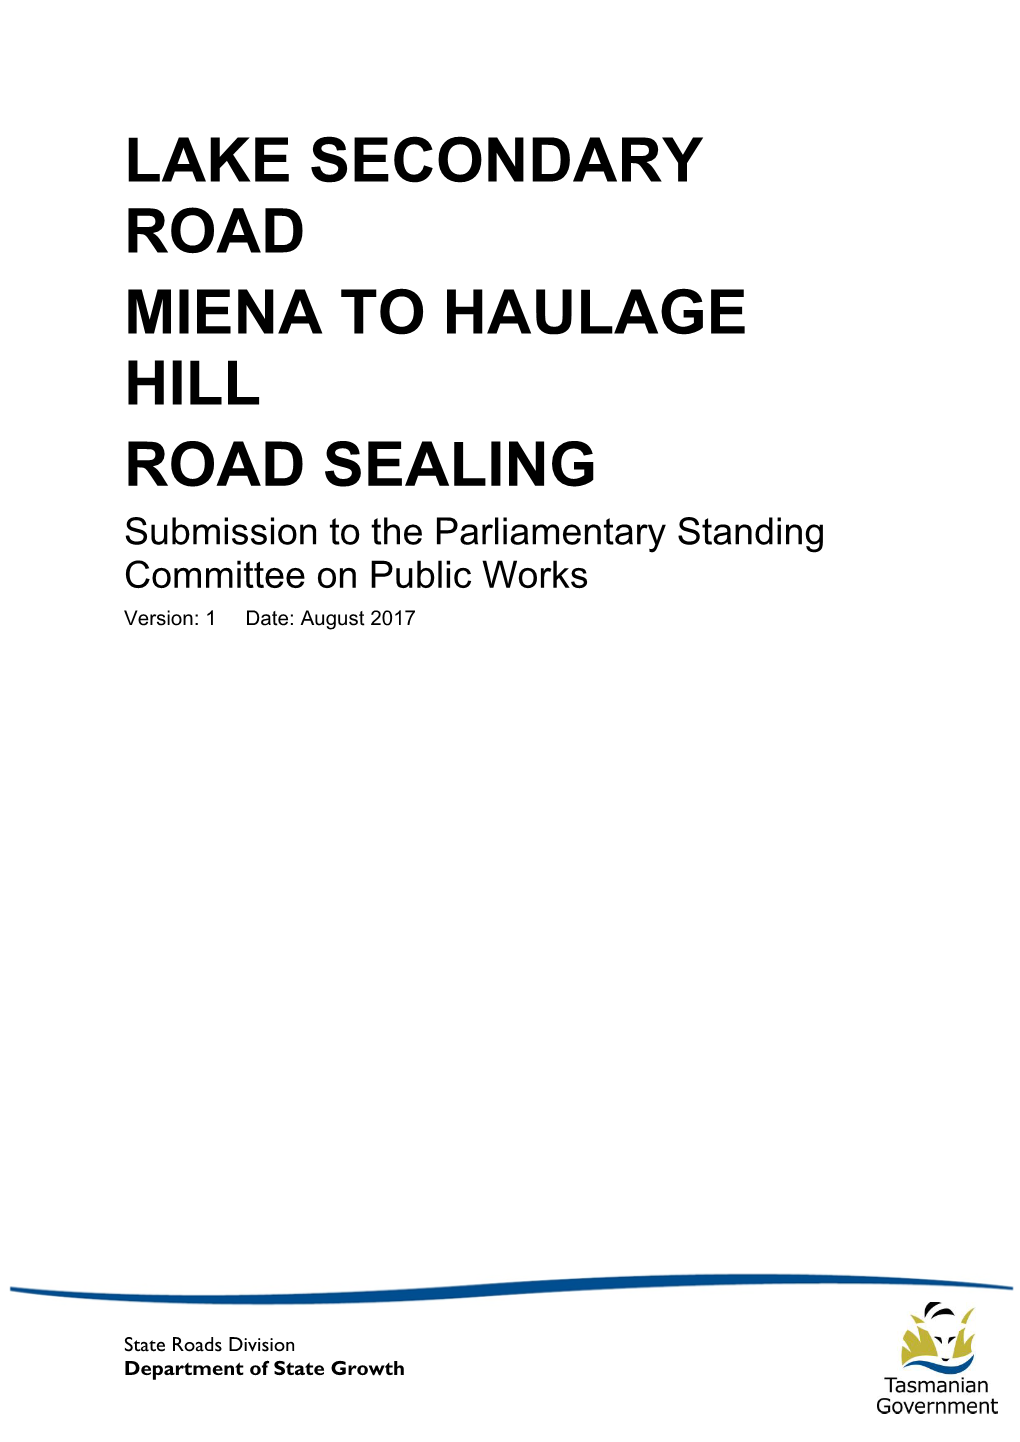 LAKE SECONDARY ROAD MIENA to HAULAGE HILL ROAD SEALING Submission to the Parliamentary Standing Committee on Public Works Version: 1 Date: August 2017